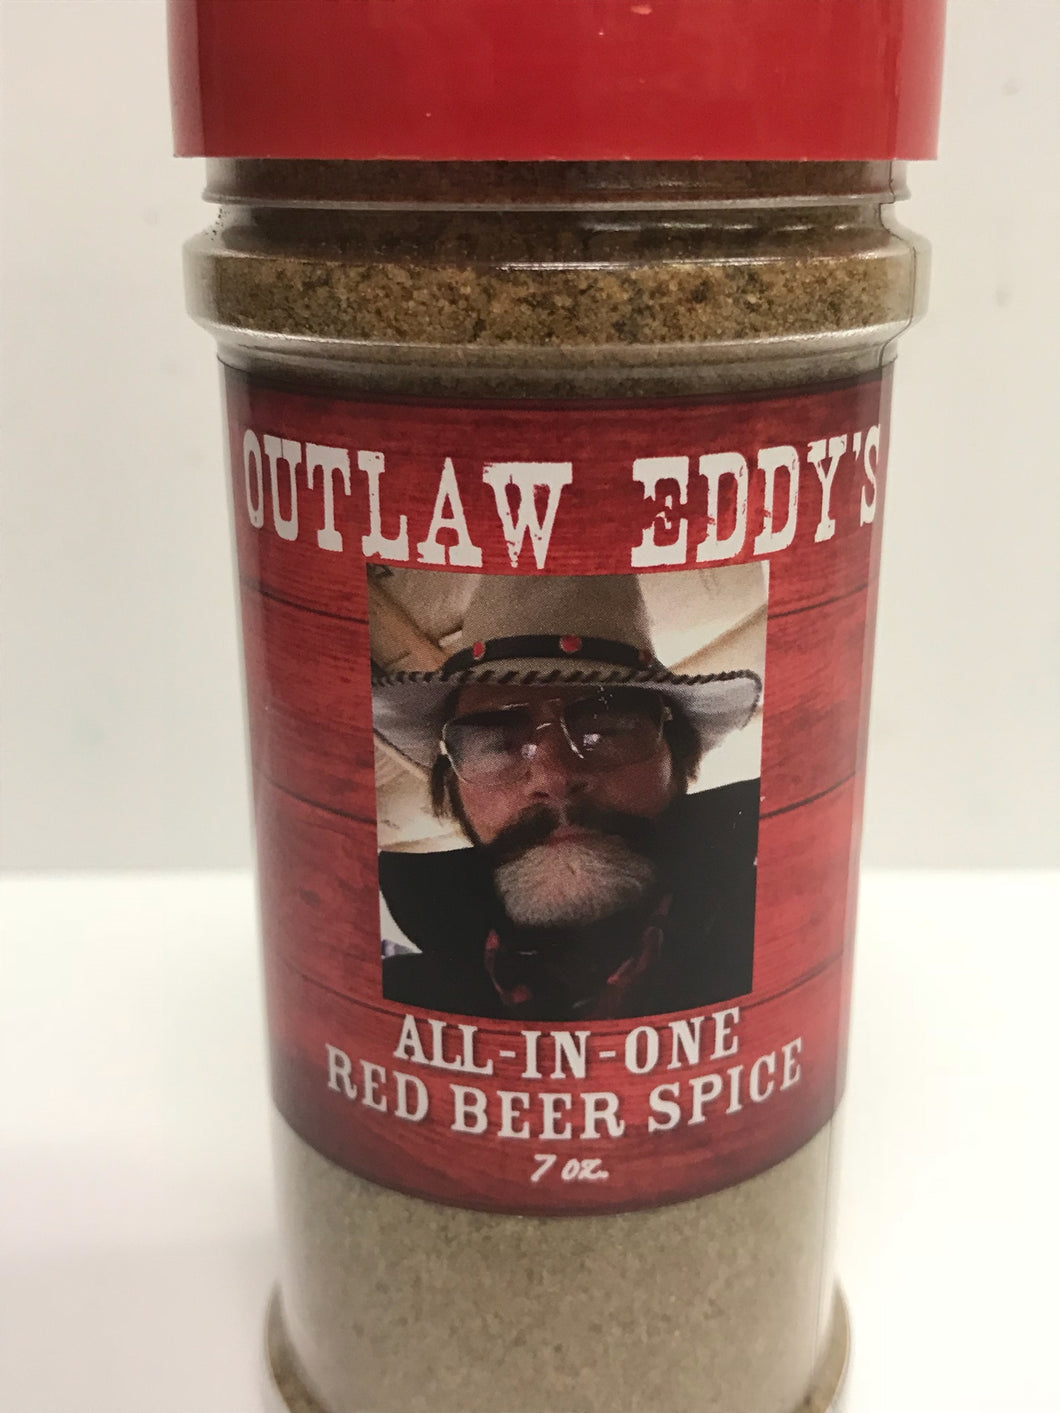 Outlaw Eddy's All-In-One Red Beer Spice